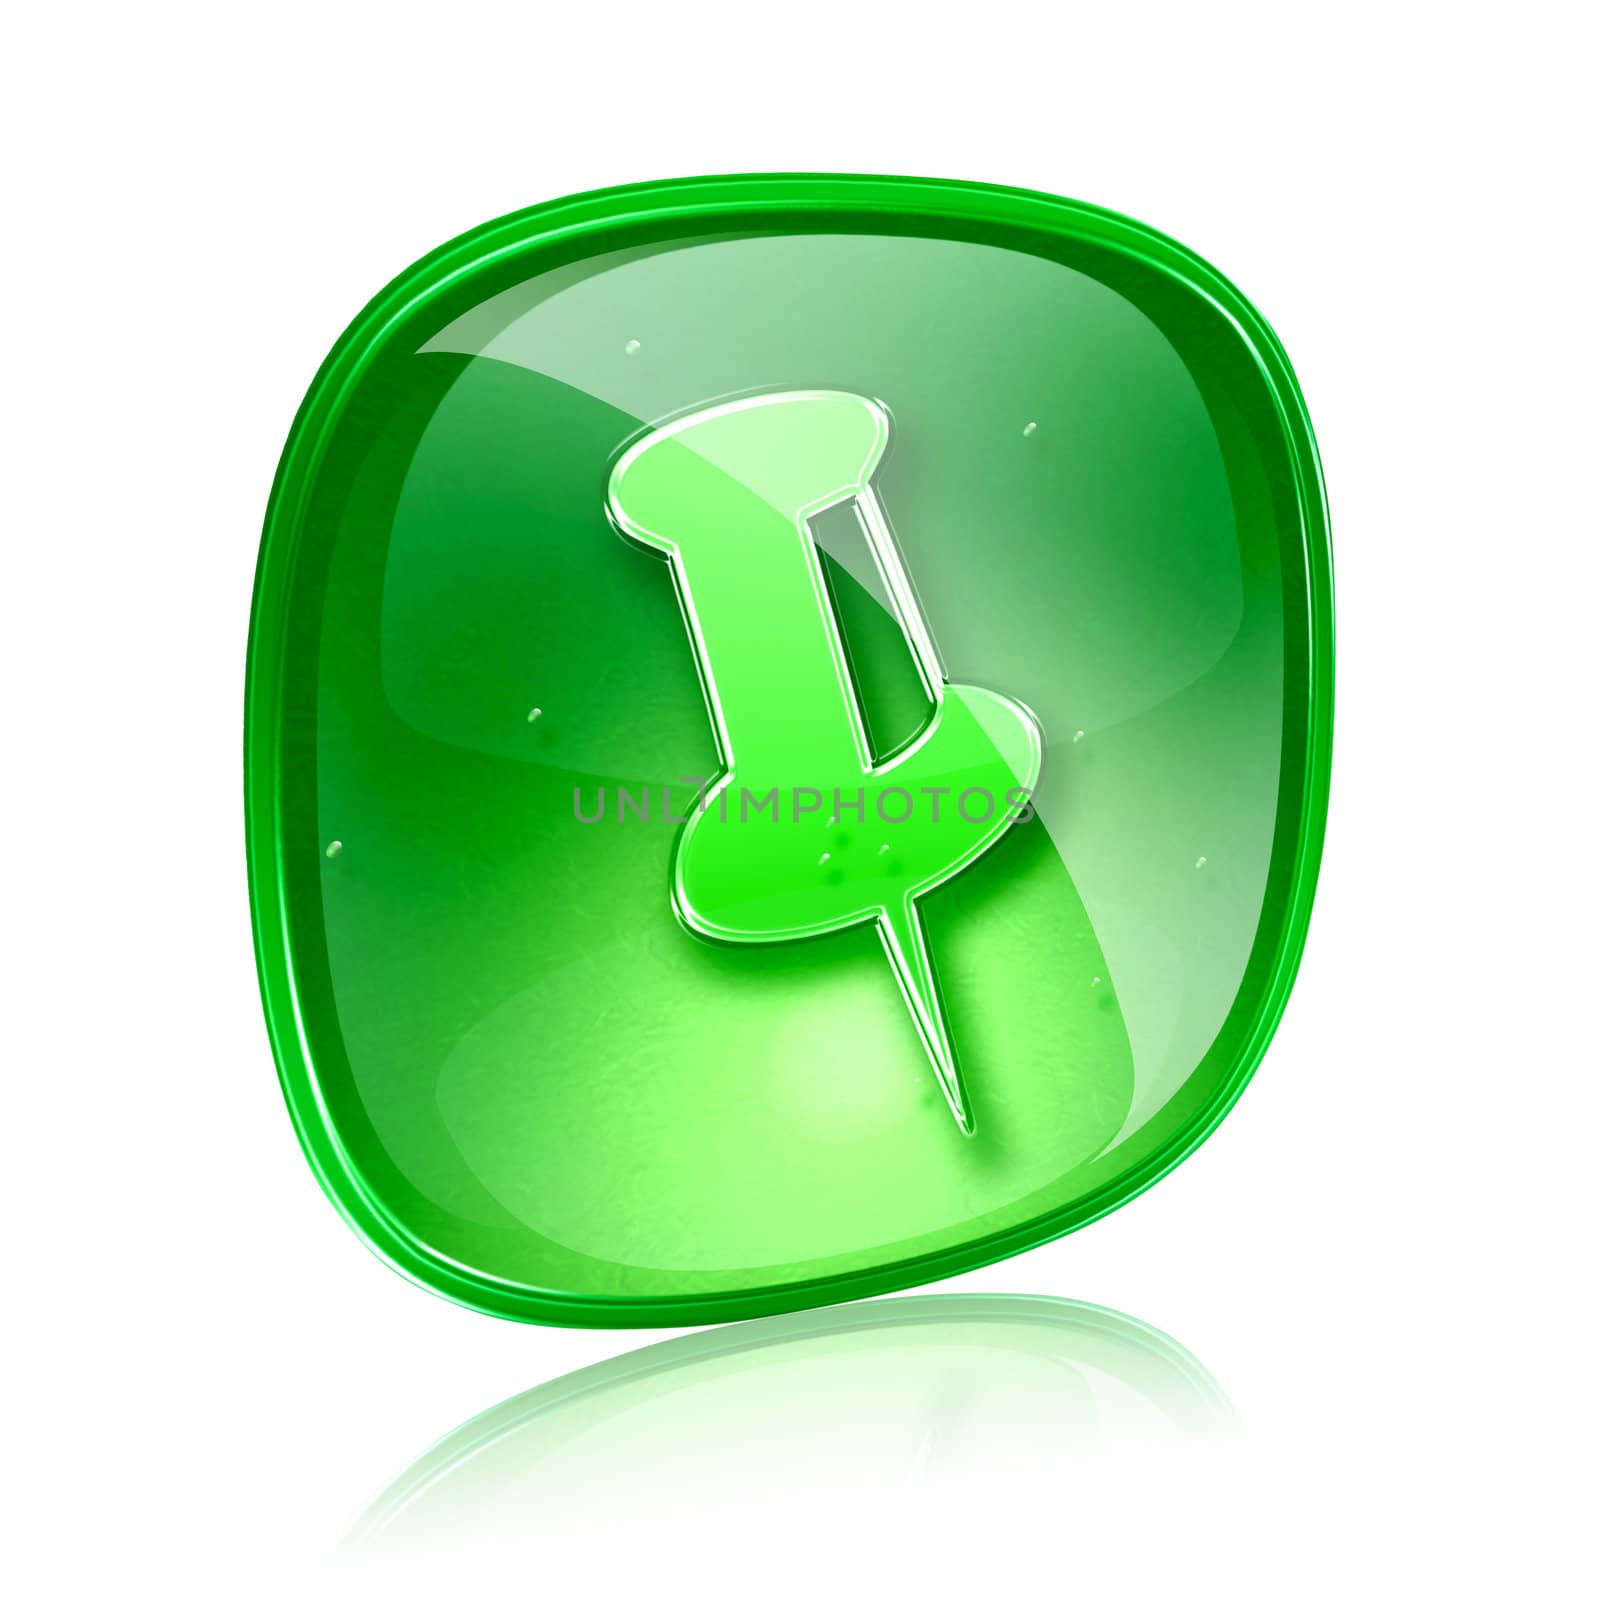 thumbtack icon green glass, isolated on white background. by zeffss